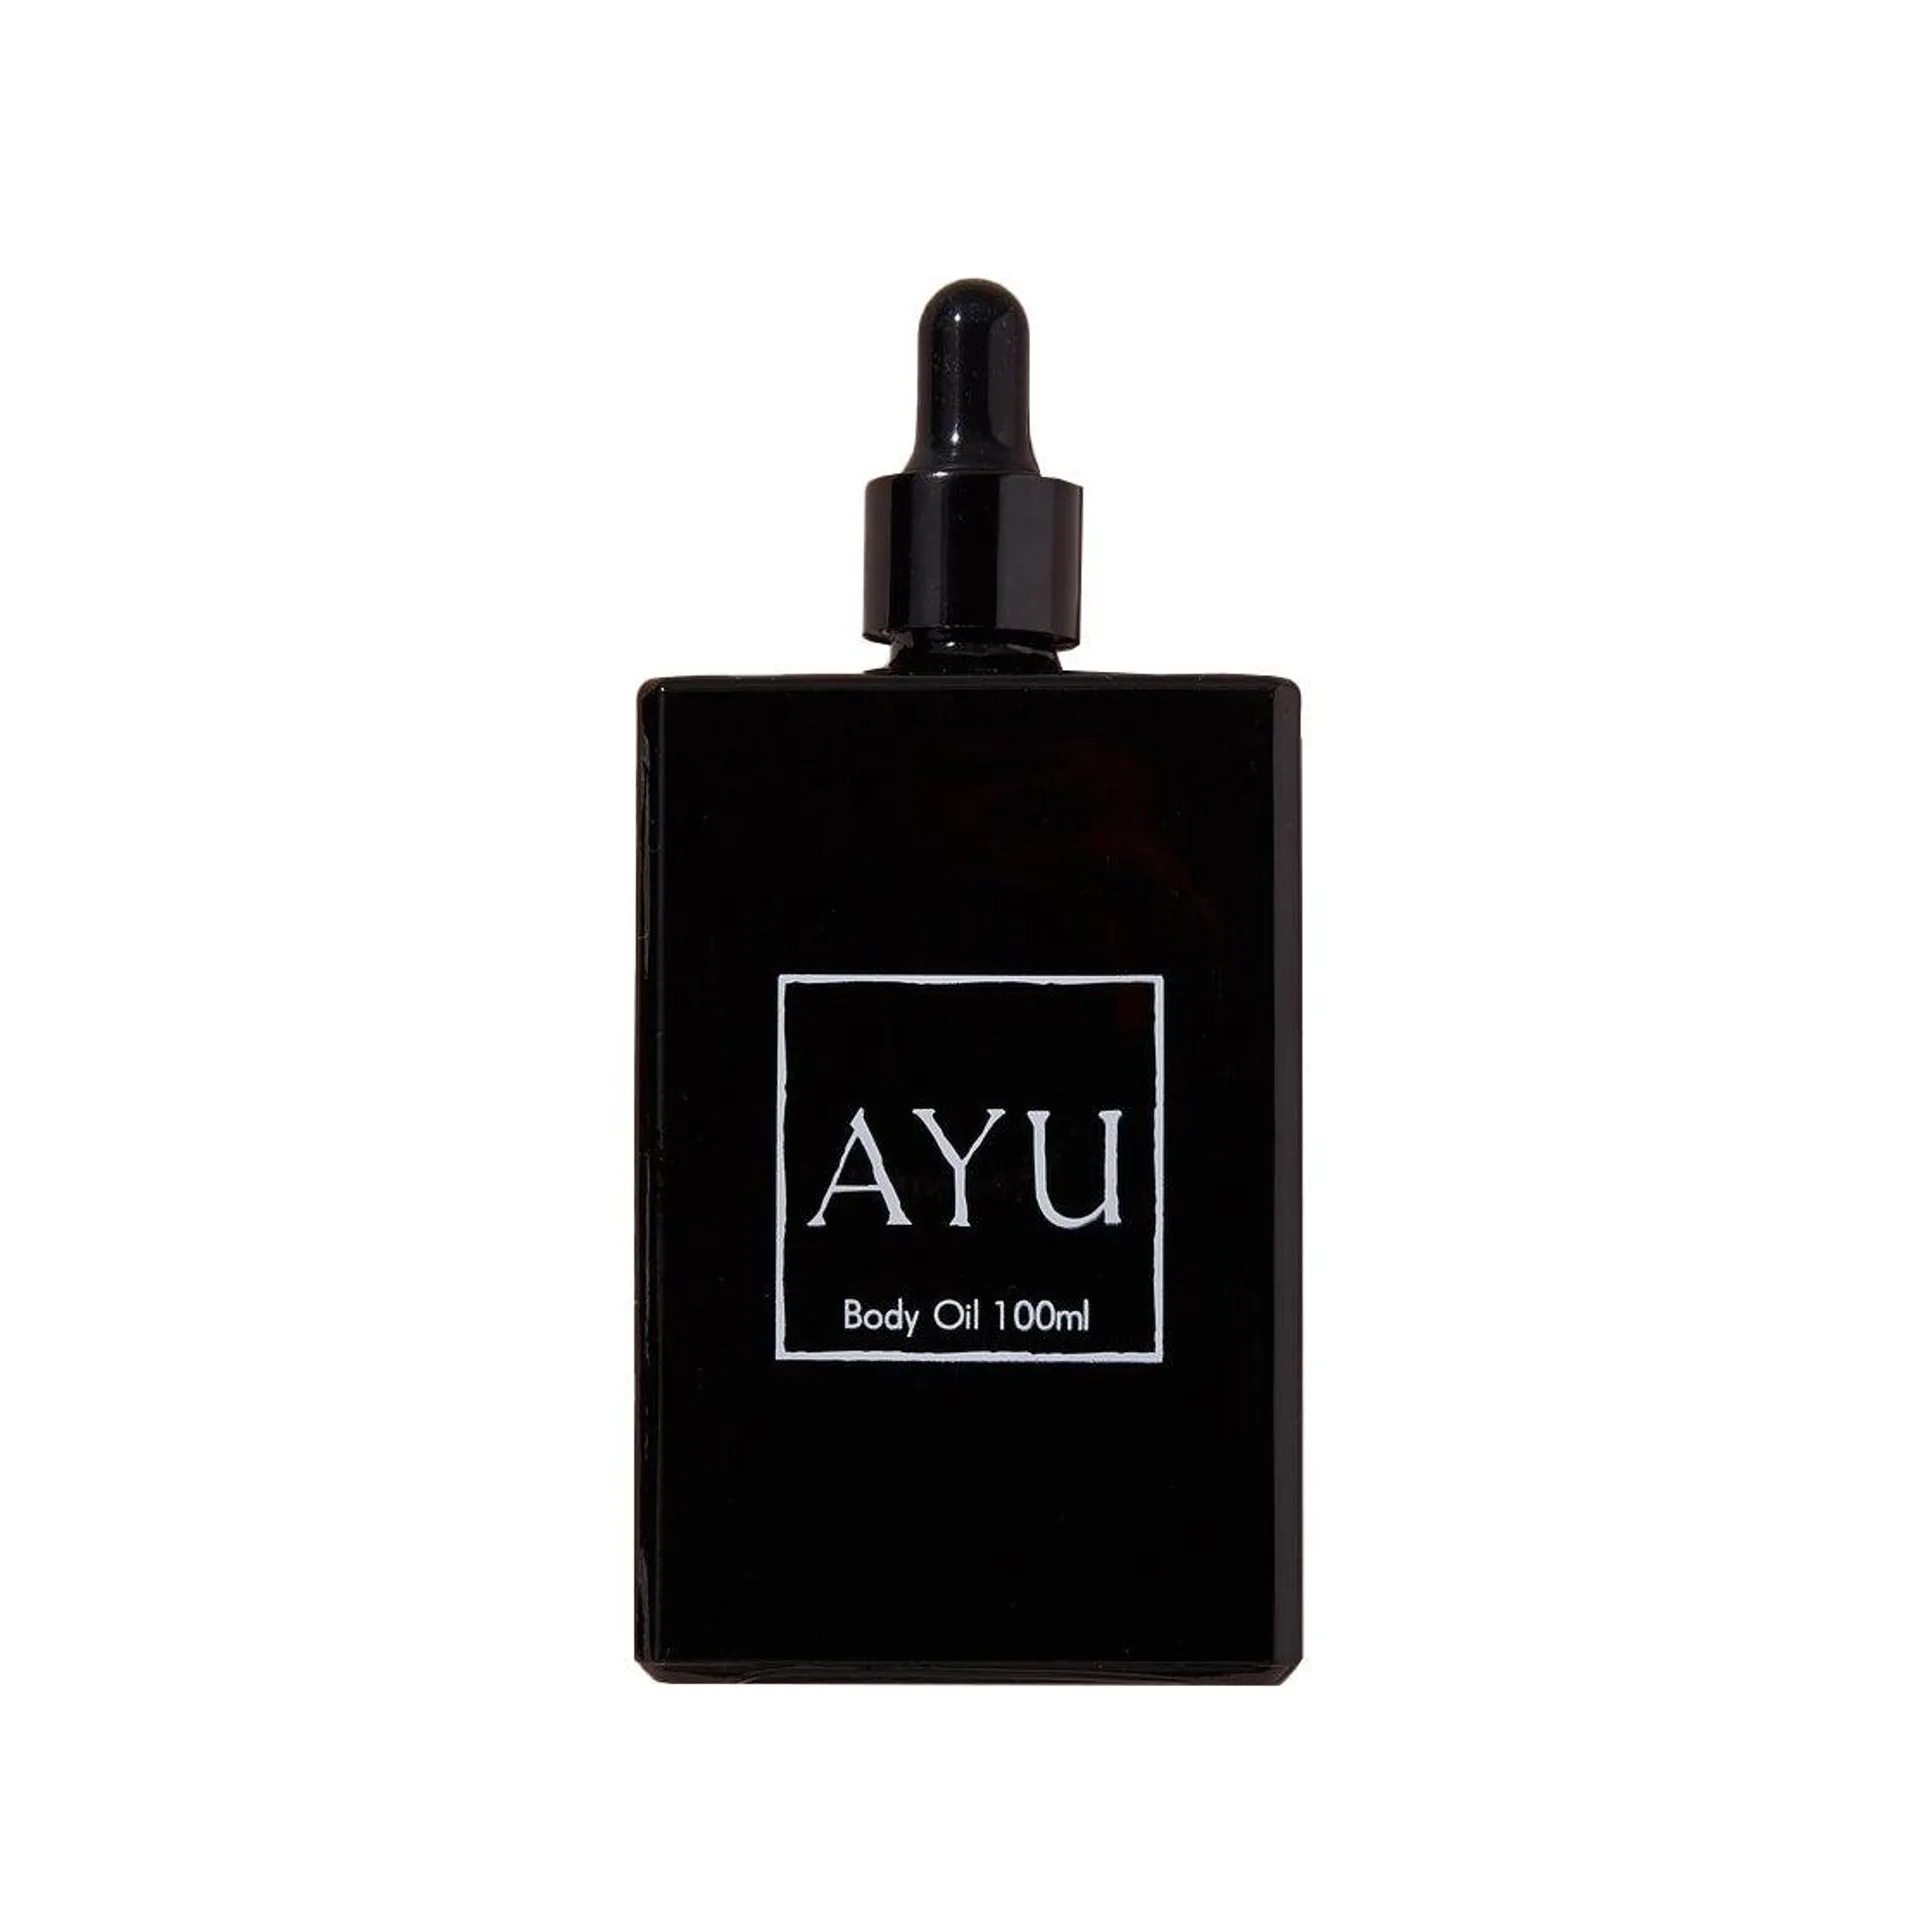 Ayu body oil sandalwood rose and patchouli